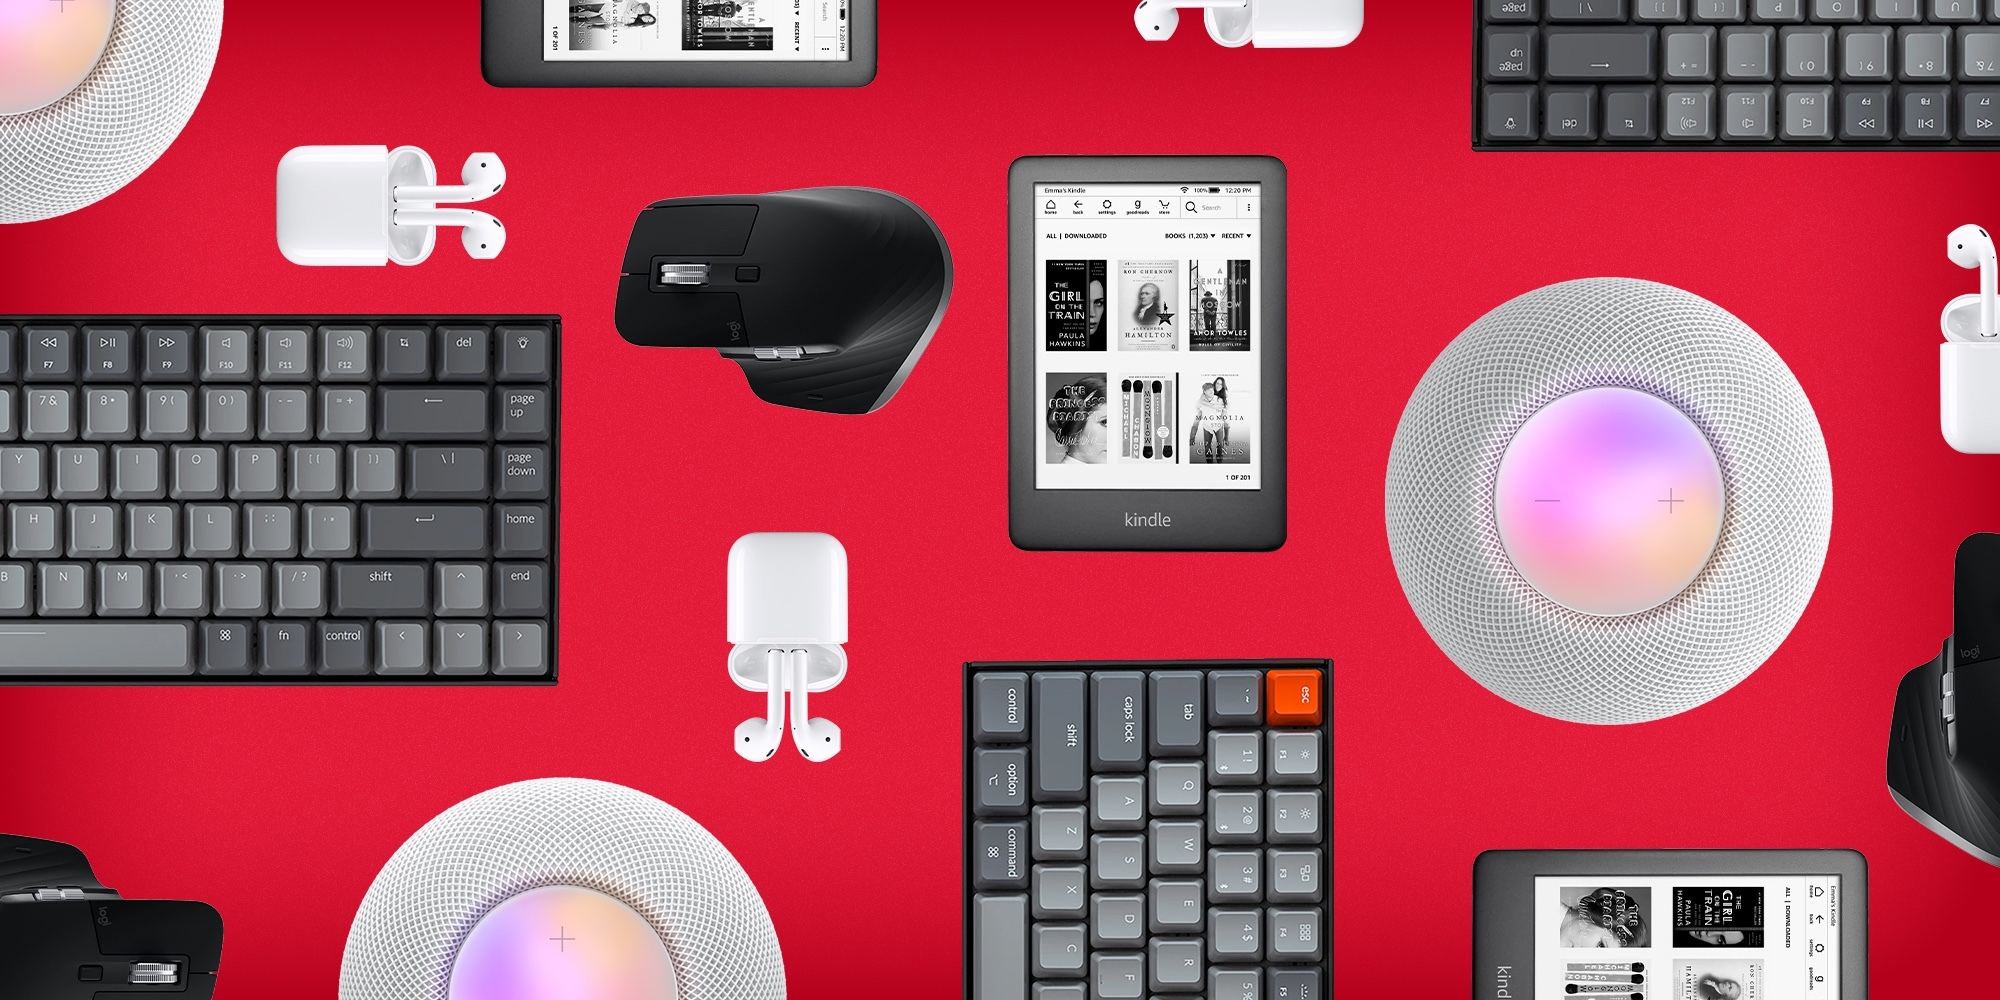 The best gadget gifts for less than $100 this holiday season.